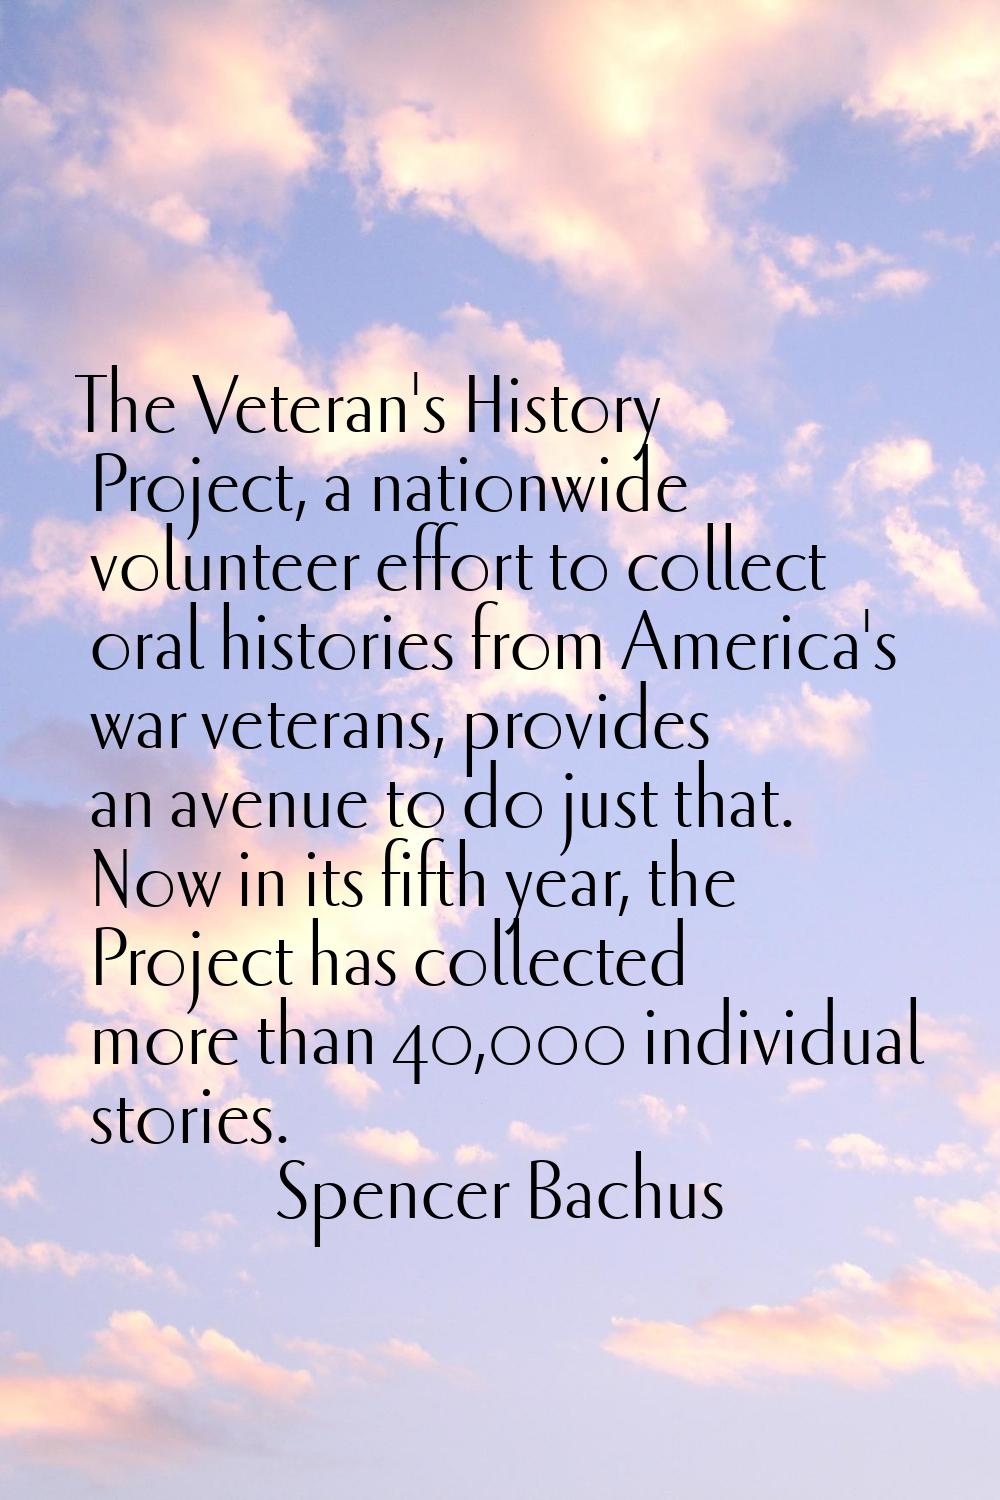 The Veteran's History Project, a nationwide volunteer effort to collect oral histories from America